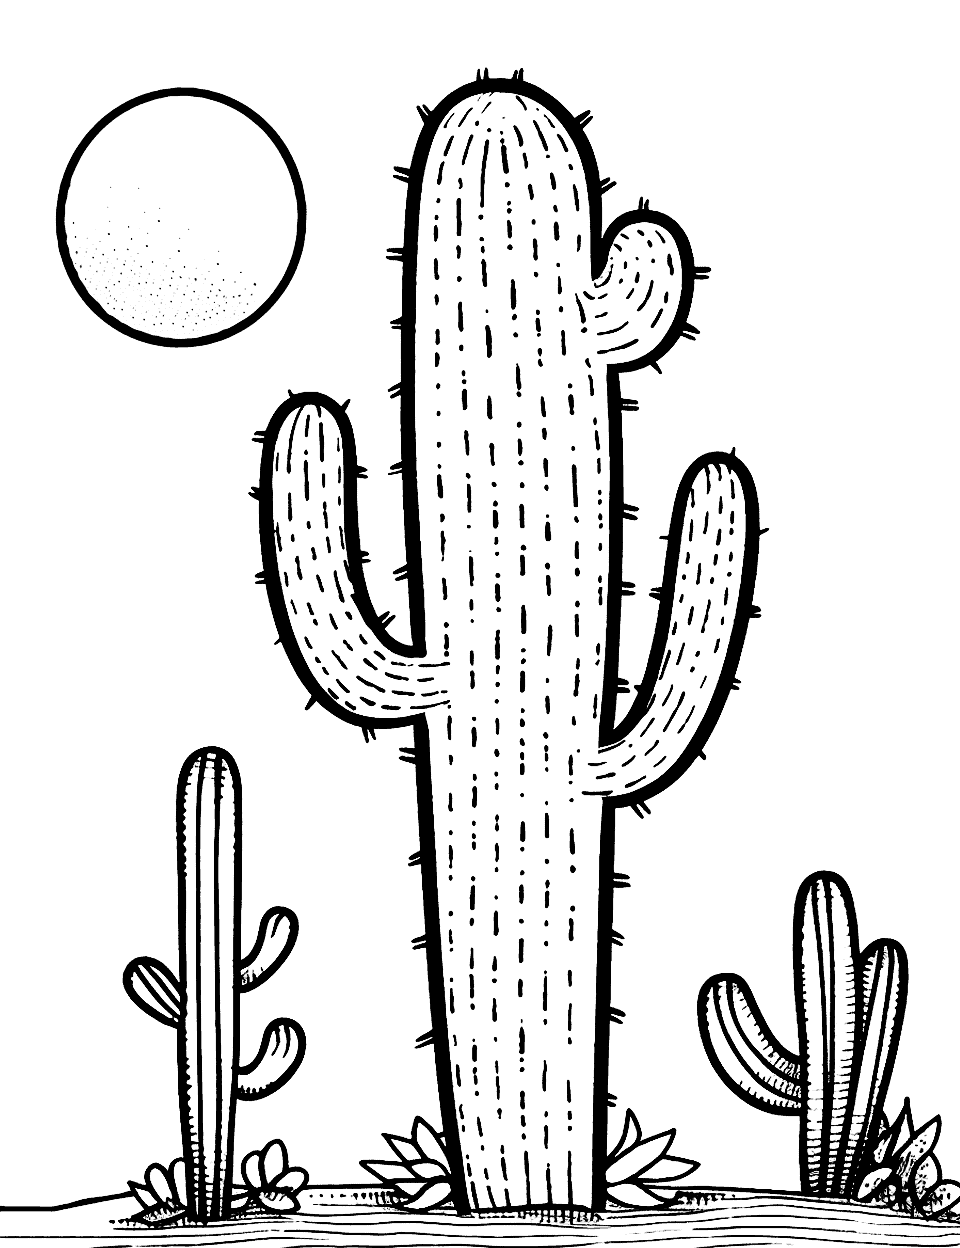 Cactus and Moonlit Night Coloring Page - A serene scene of a cactus under a night sky with a bright, full moon.